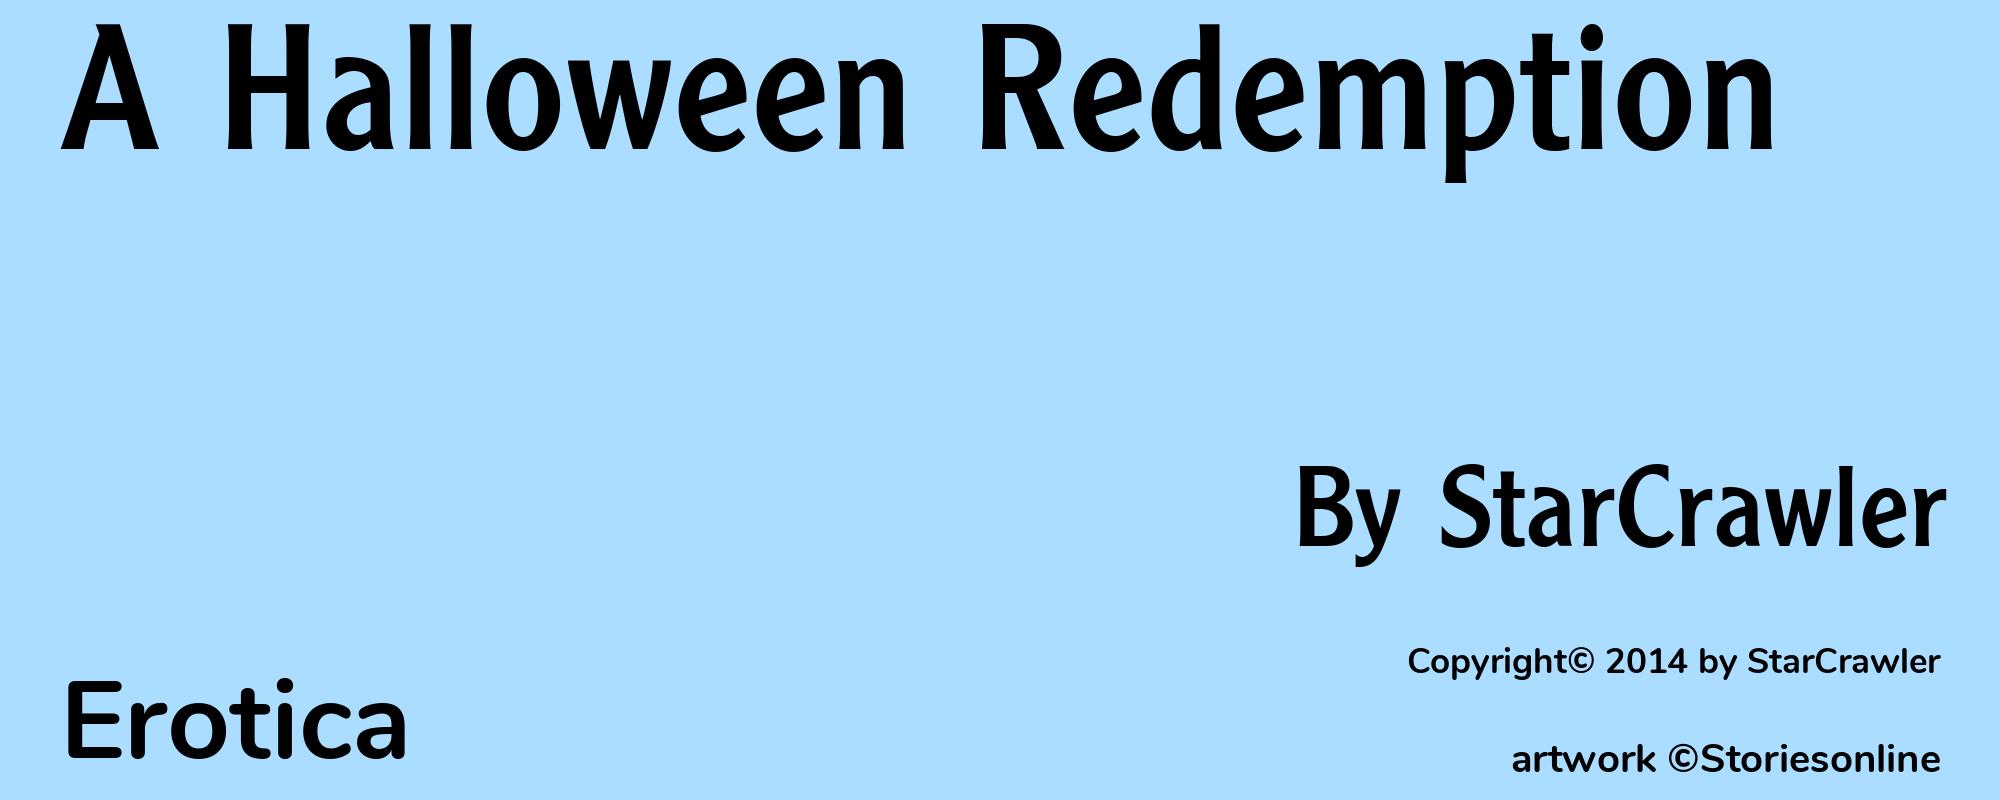 A Halloween Redemption - Cover